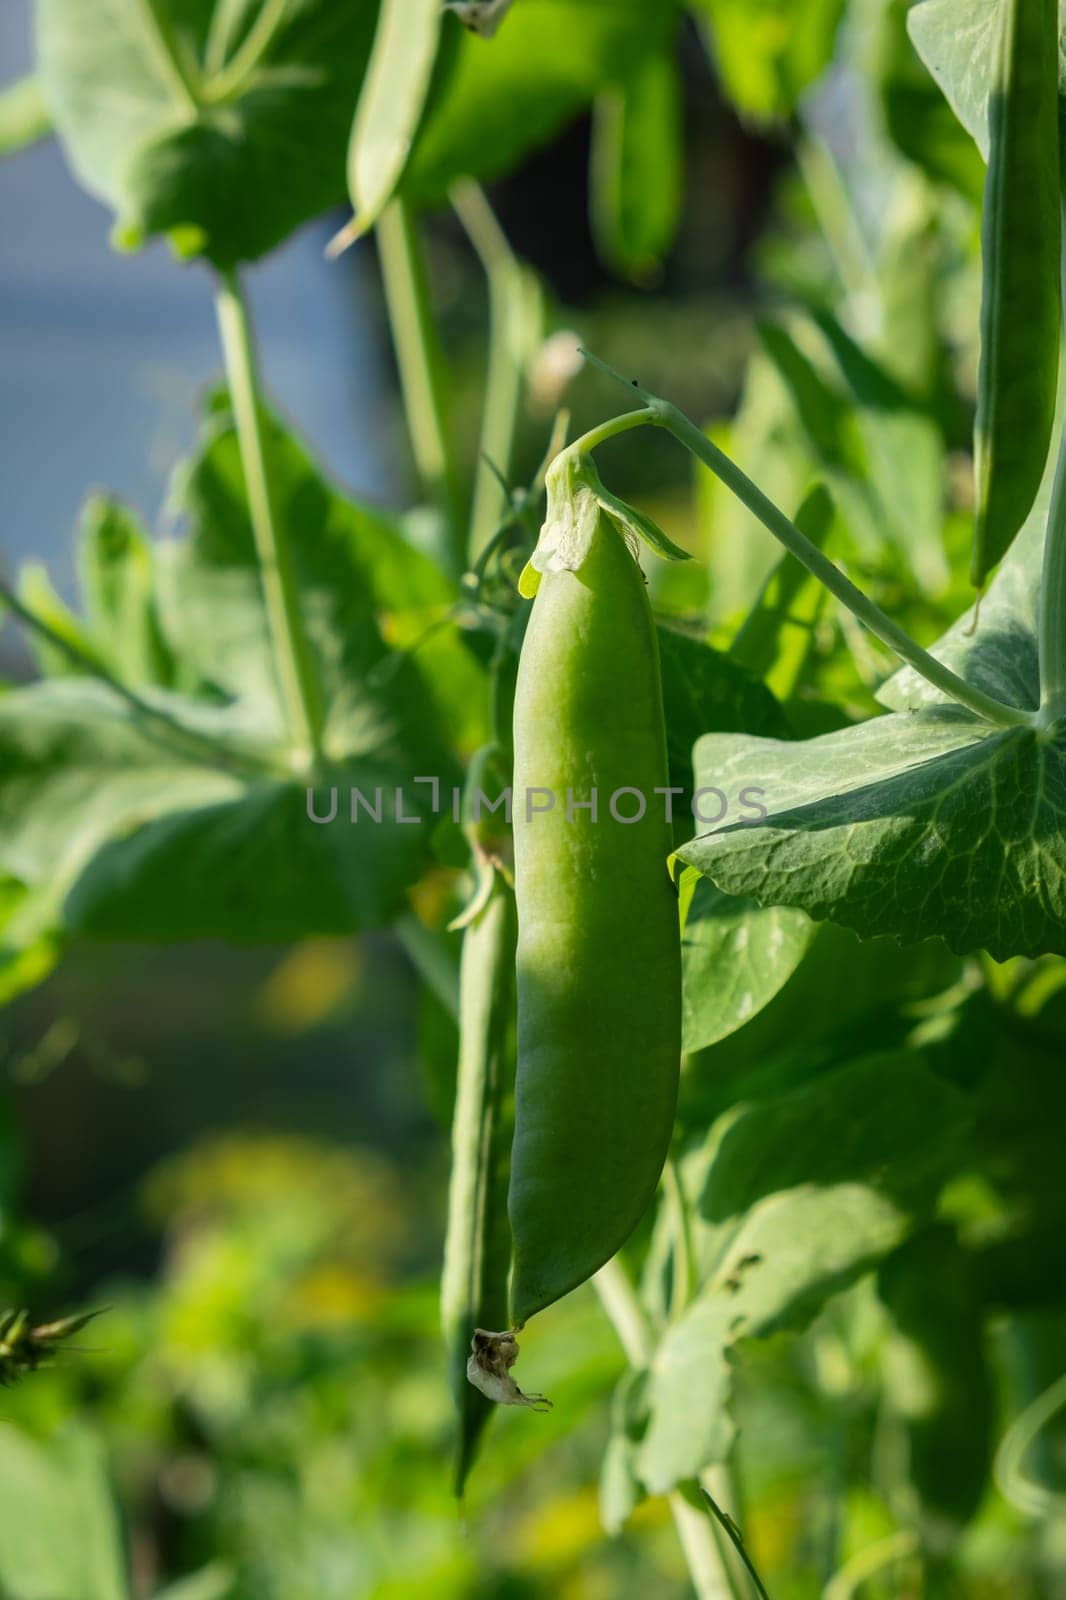 Growing peas outdoors and blurred background. Green pea pods by AnatoliiFoto